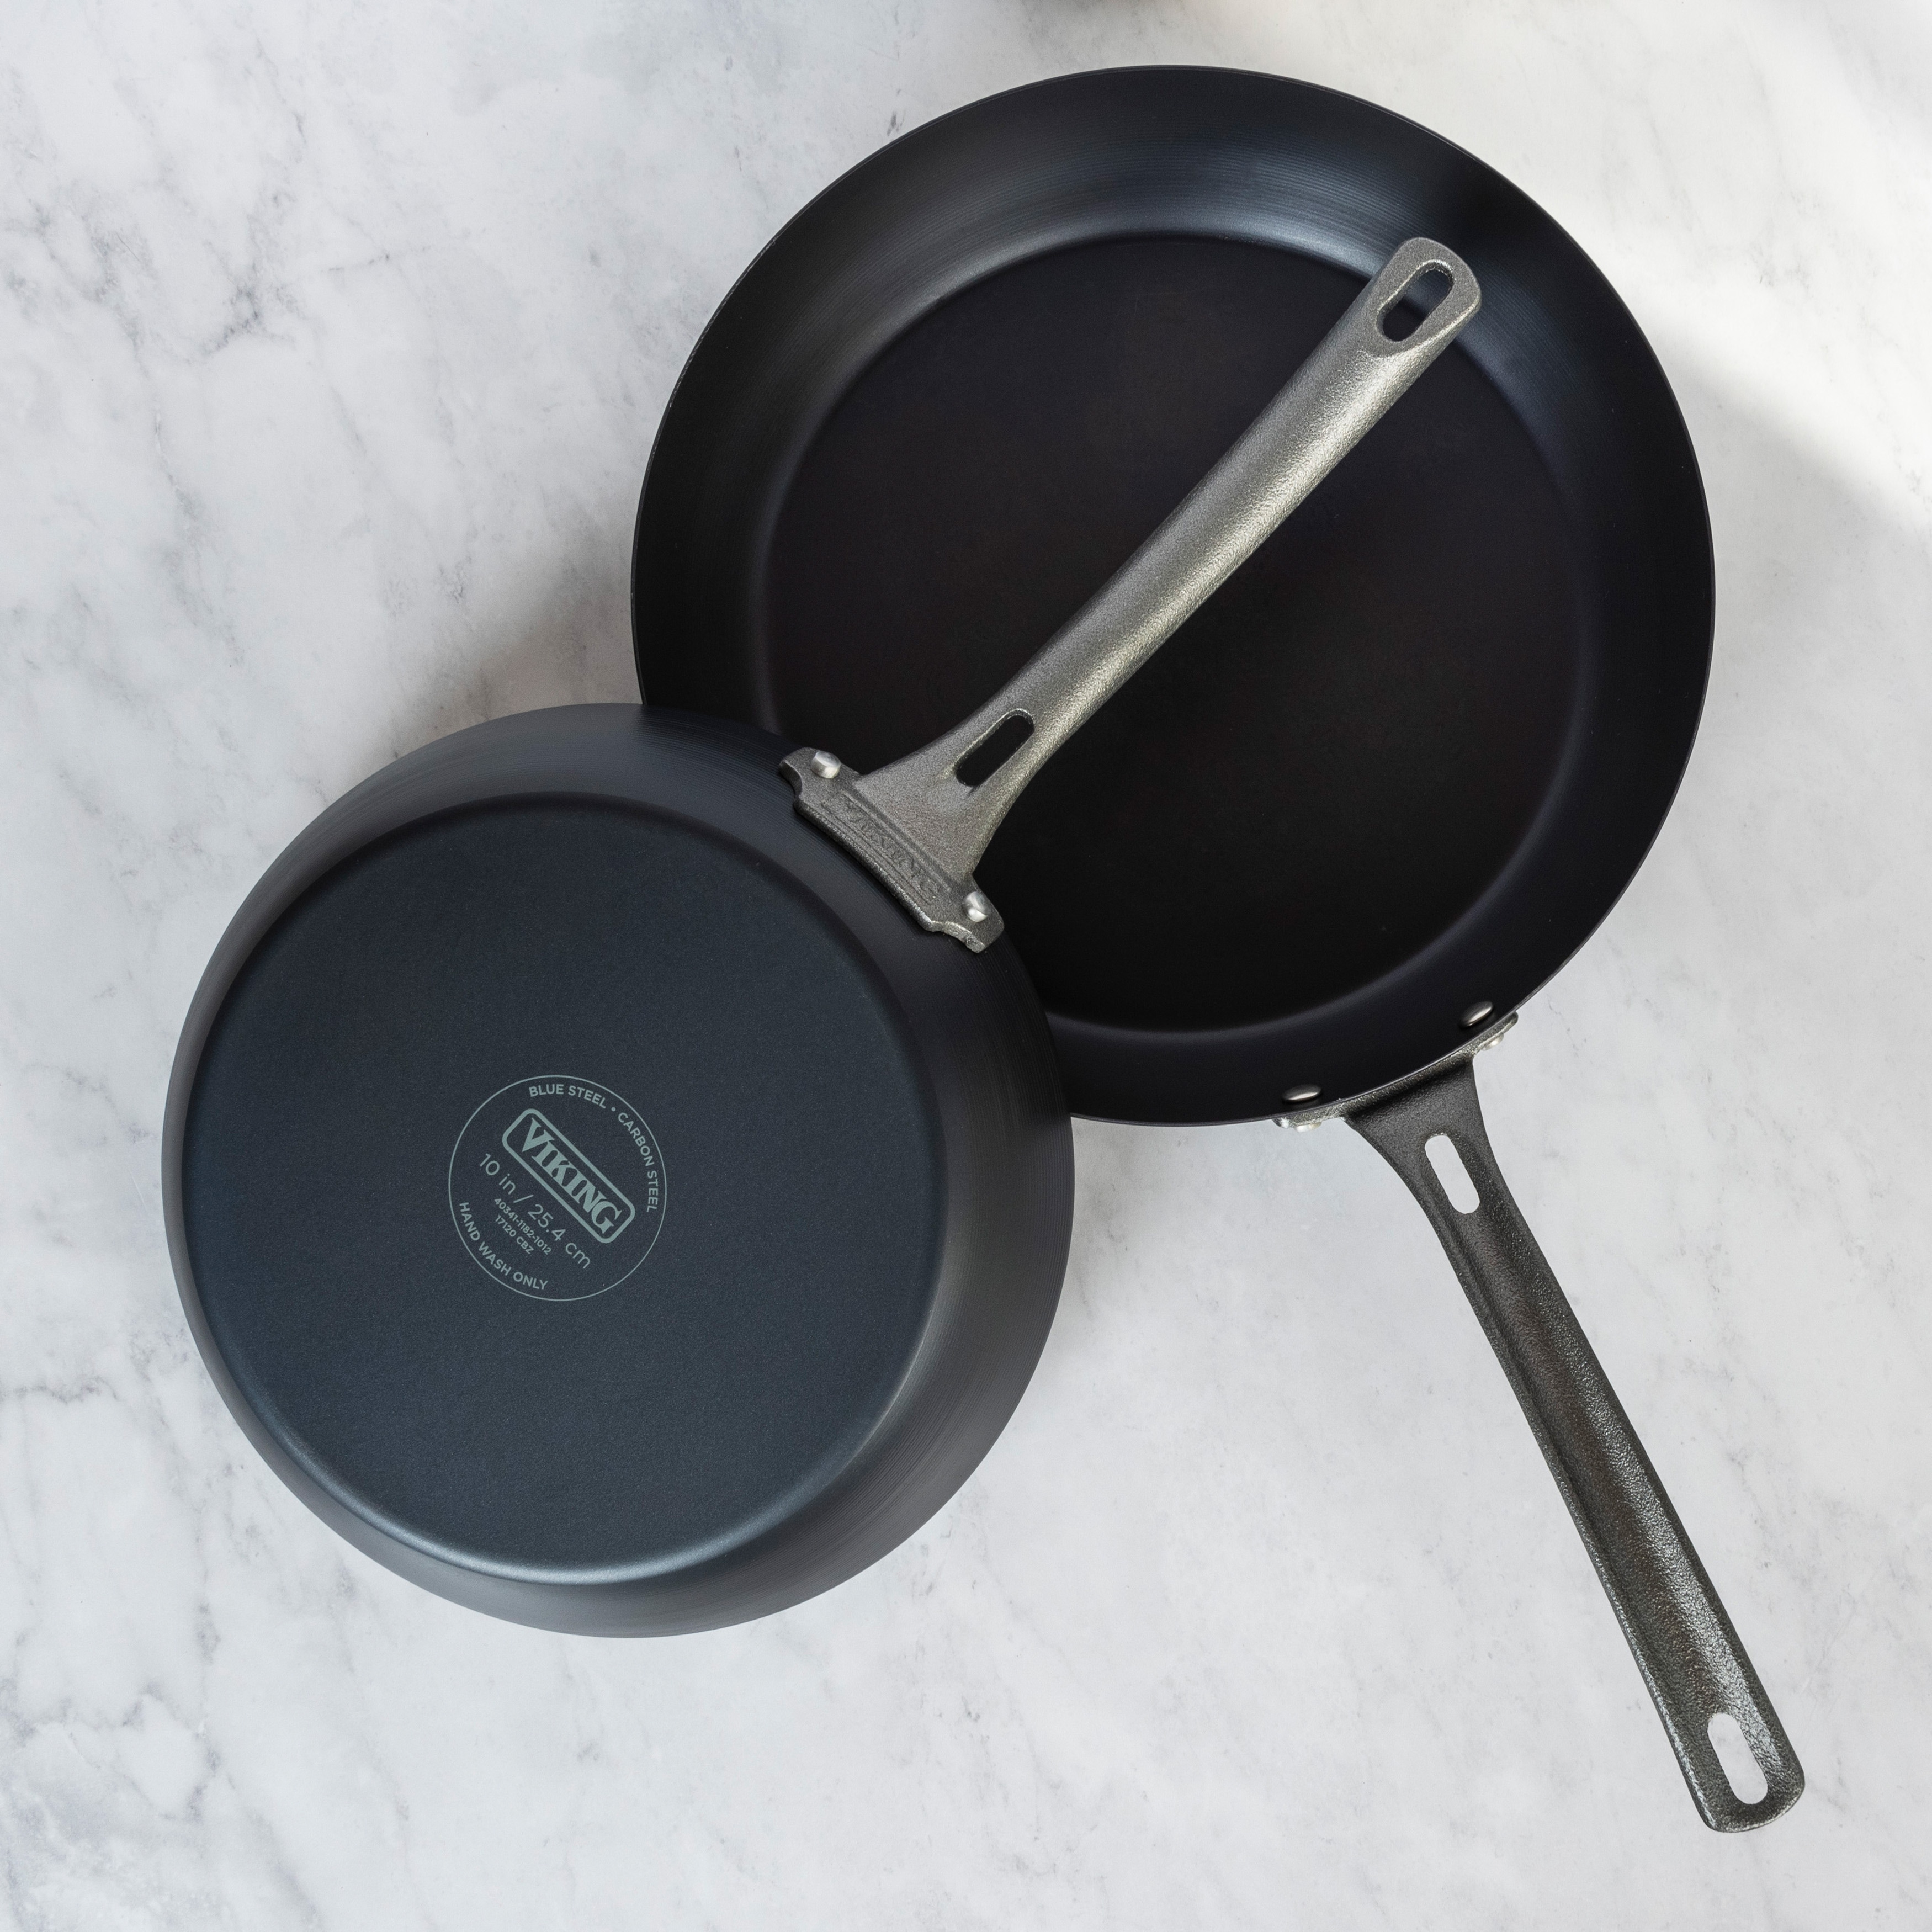 https://ak1.ostkcdn.com/images/products/is/images/direct/441446c993e0807a837150d0be8bb191531ea292/Viking-2-Piece-Blue-Carbon-Steel-Fry-Pan-Set.jpg